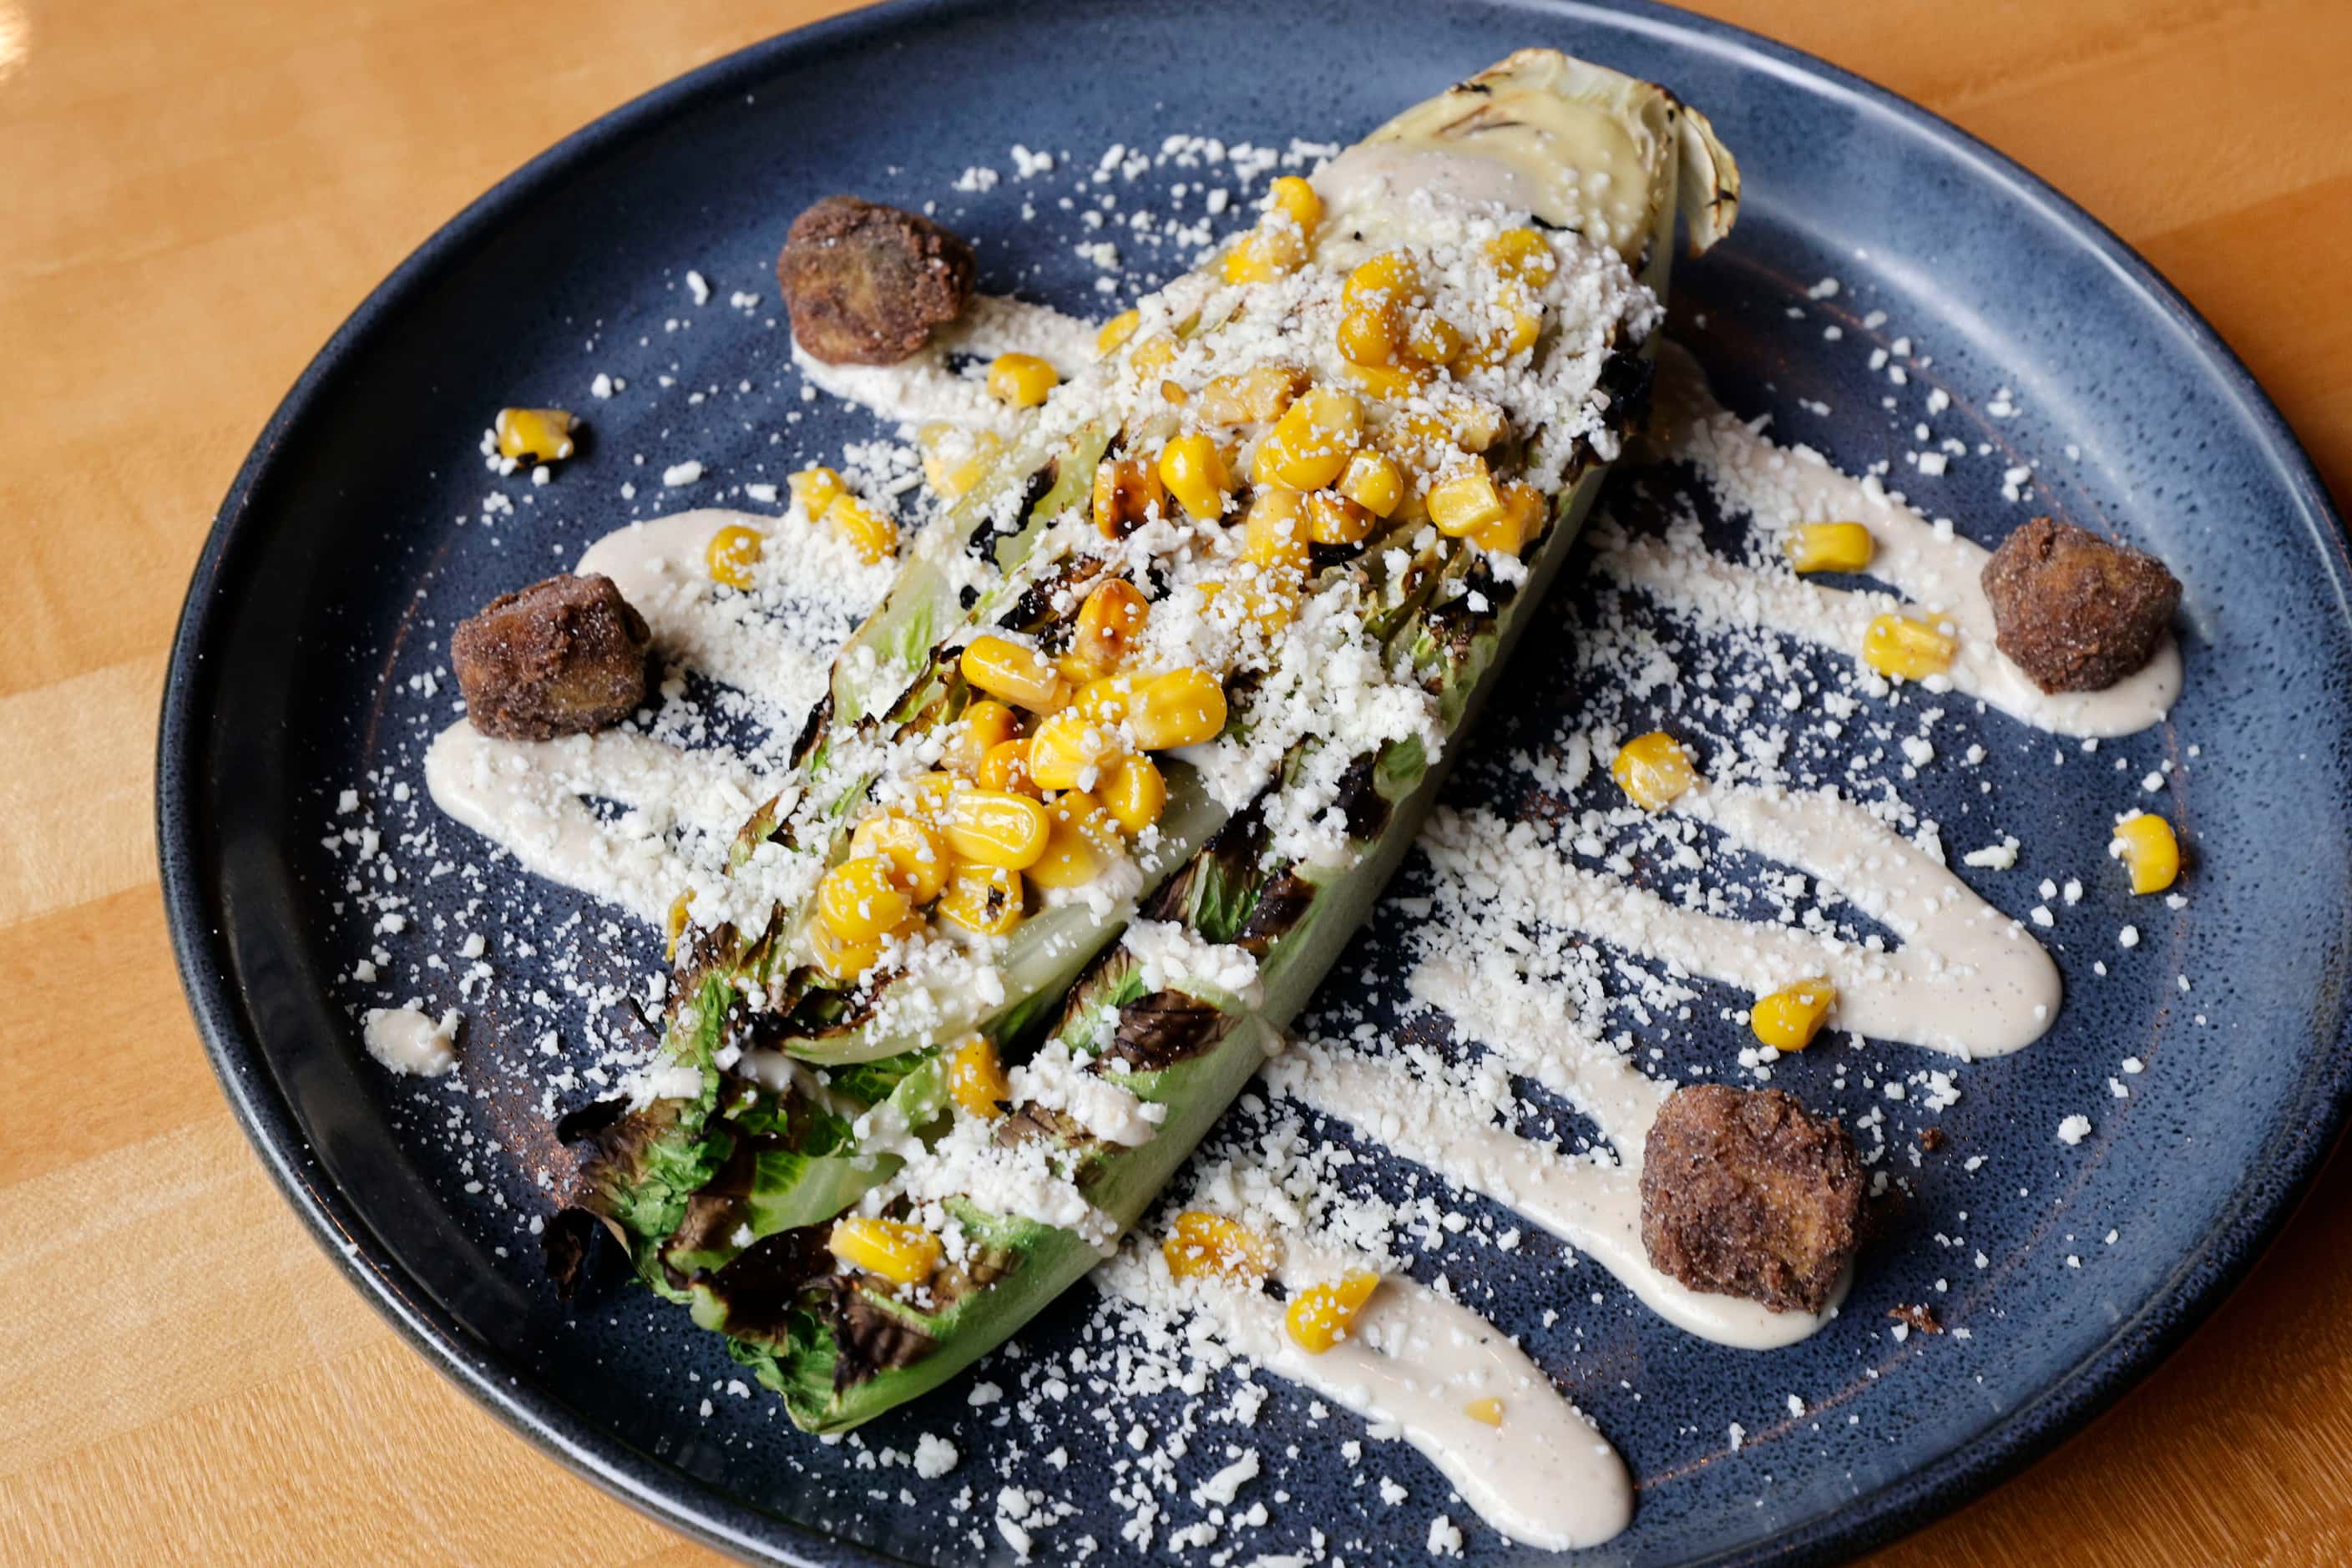 Grilled Caesar Salad is a good way to start lunch or dinner at Chido Tacos and Tequila. The...